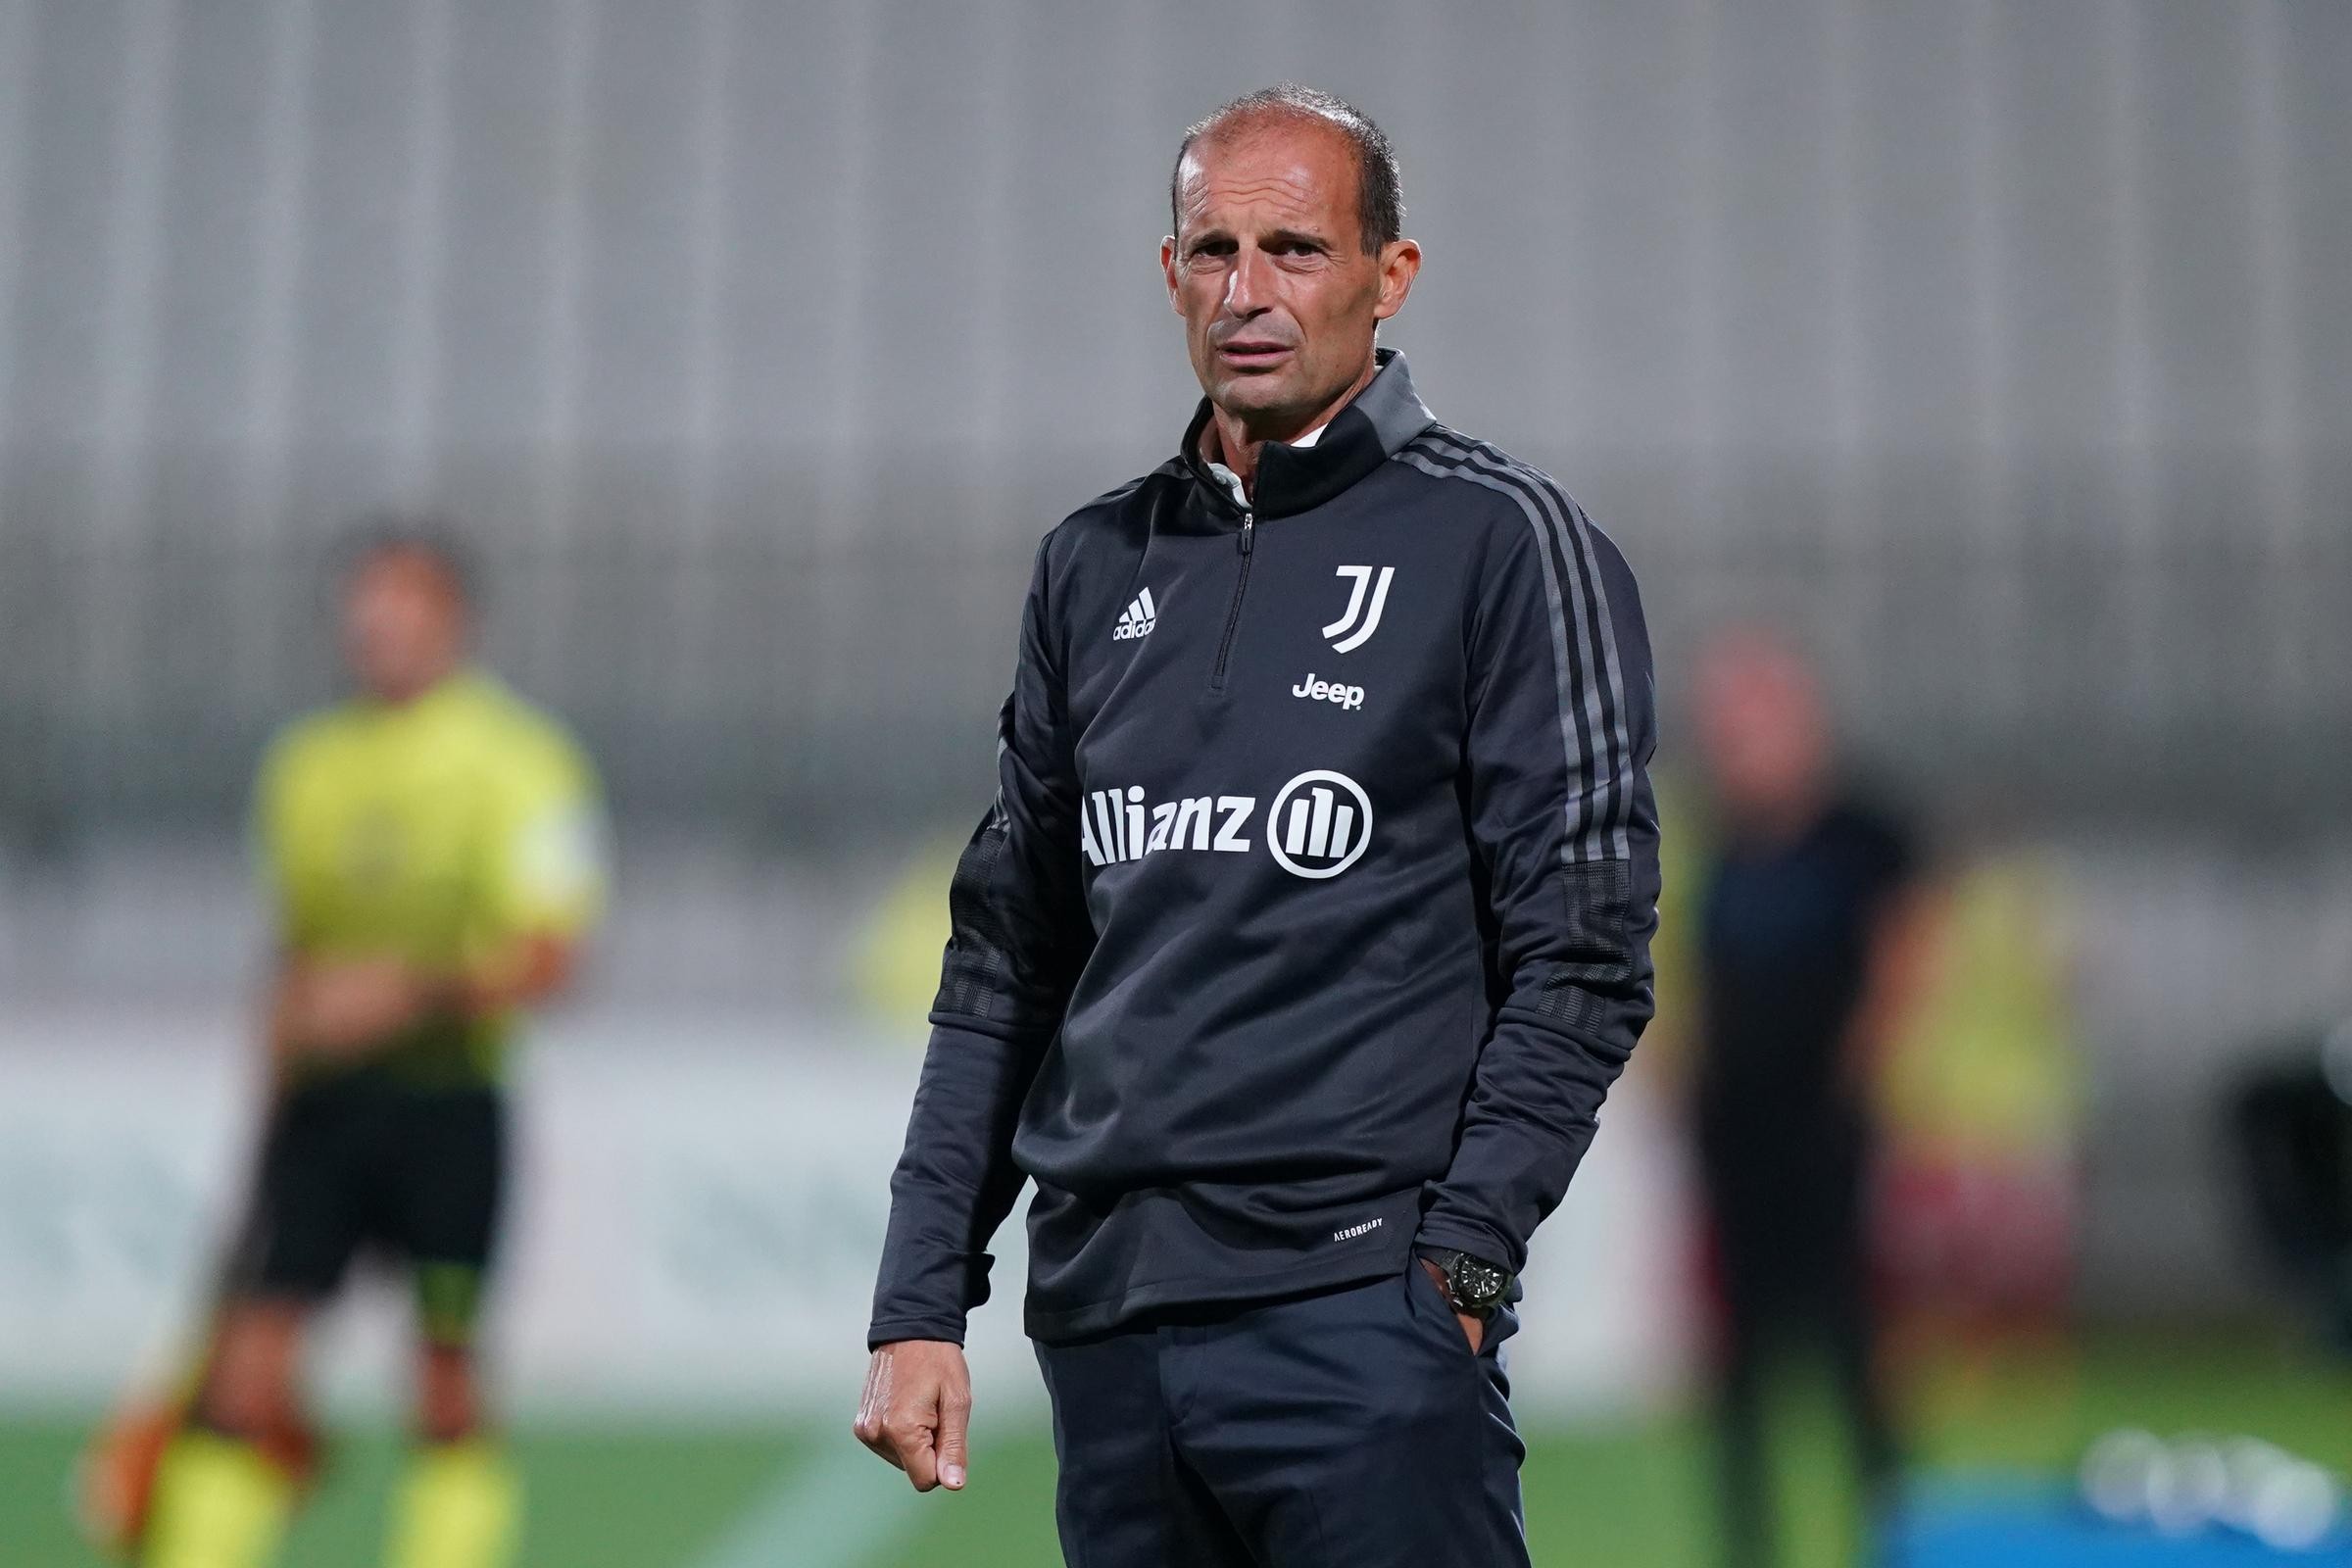 ALLEGRI: "WE HAVE TO WIN"